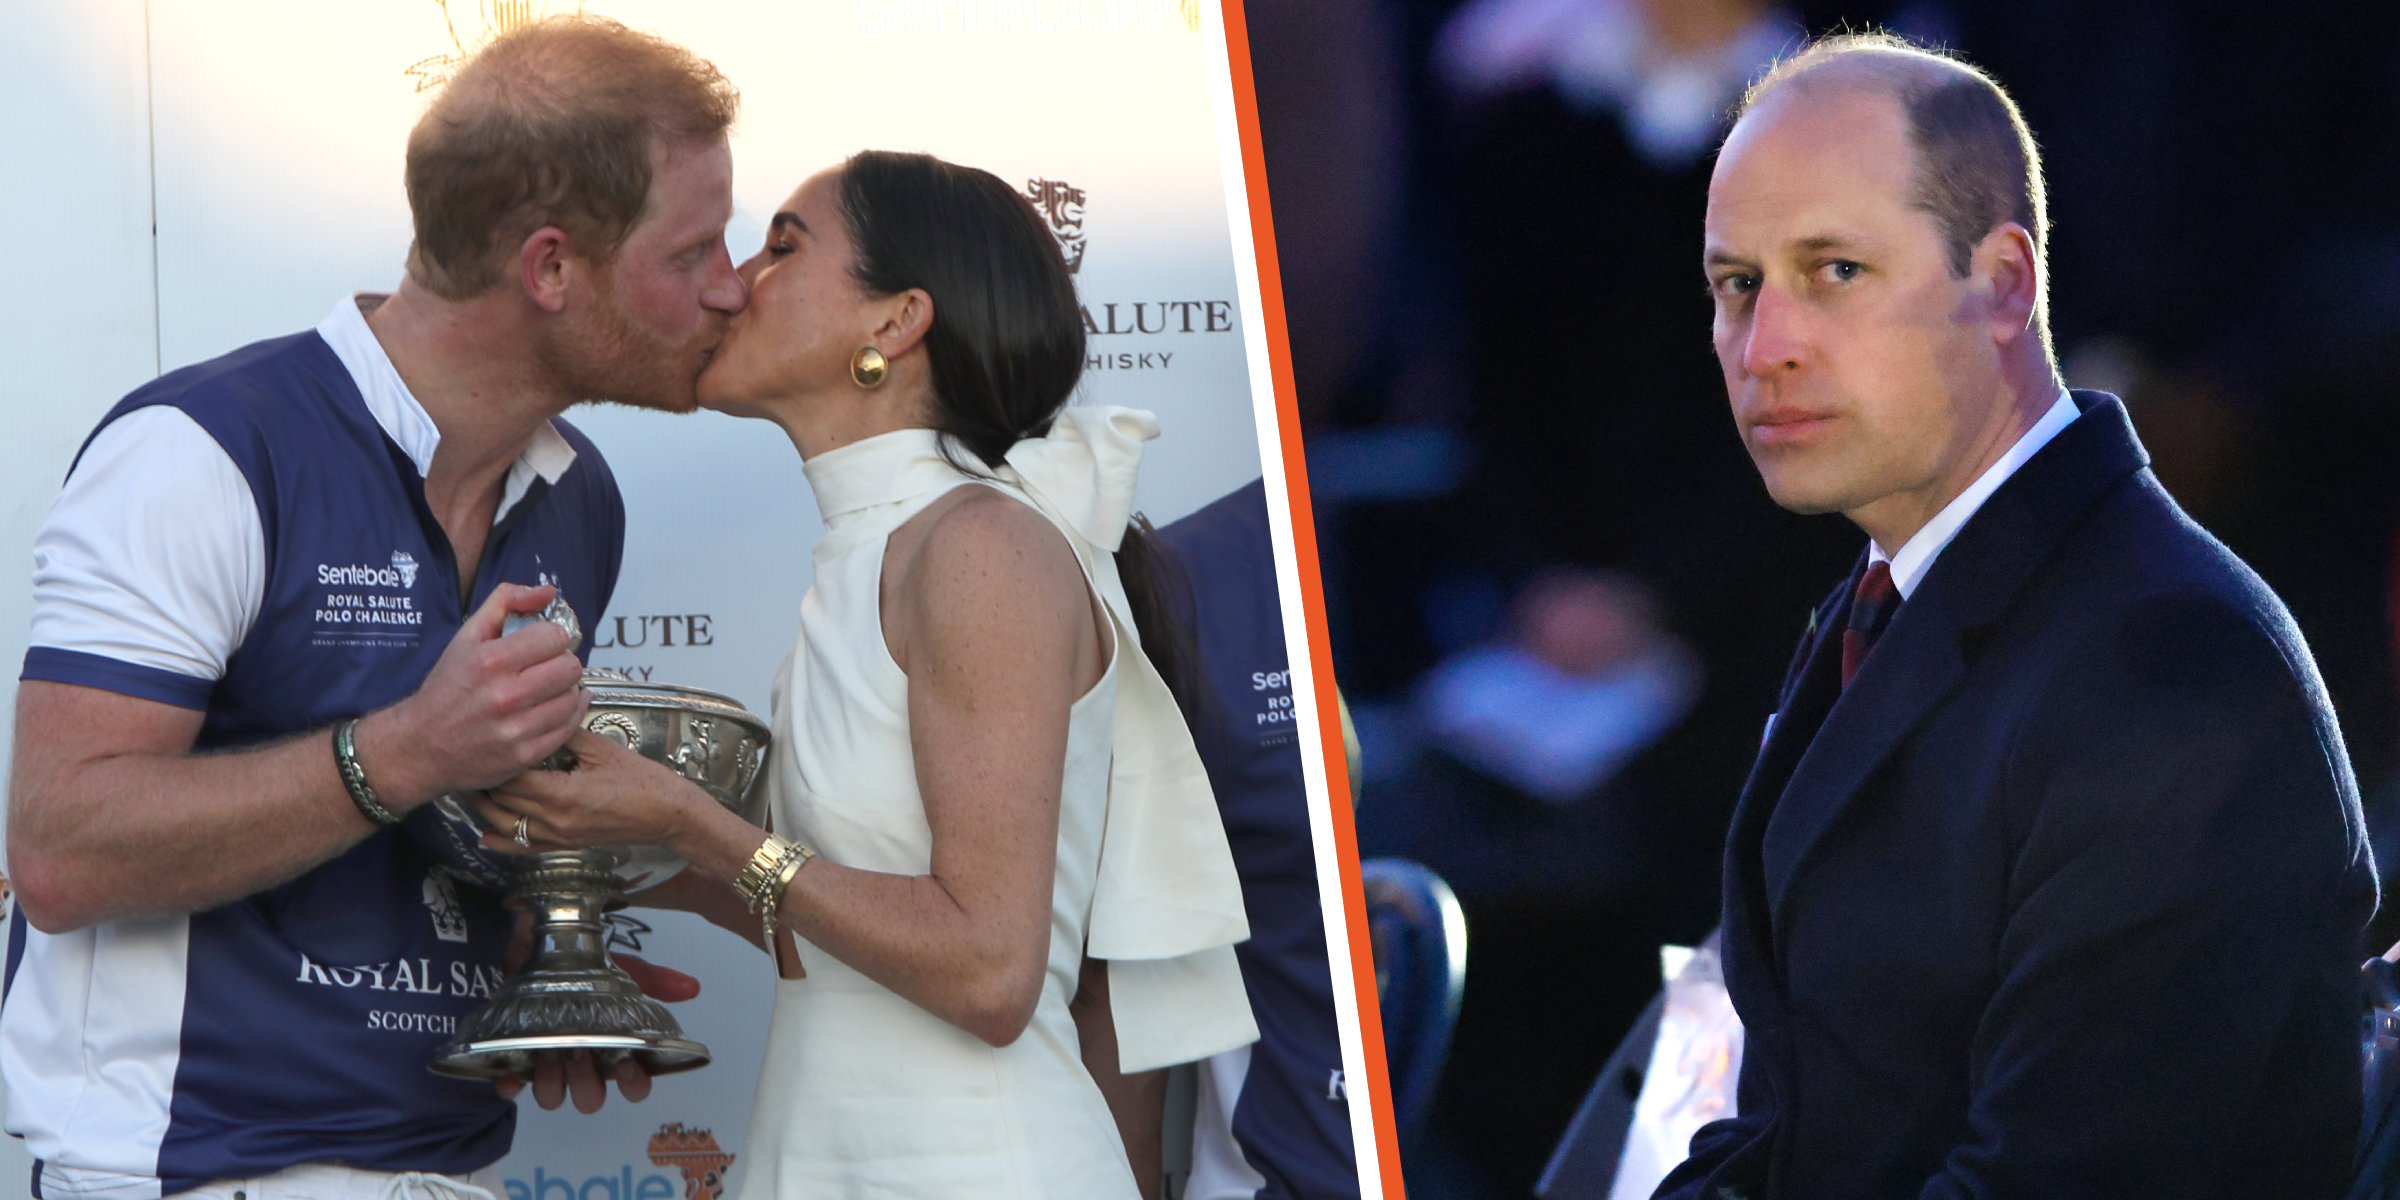 Prince Harry and Meghan Markle | Prince William | Source: Getty Images